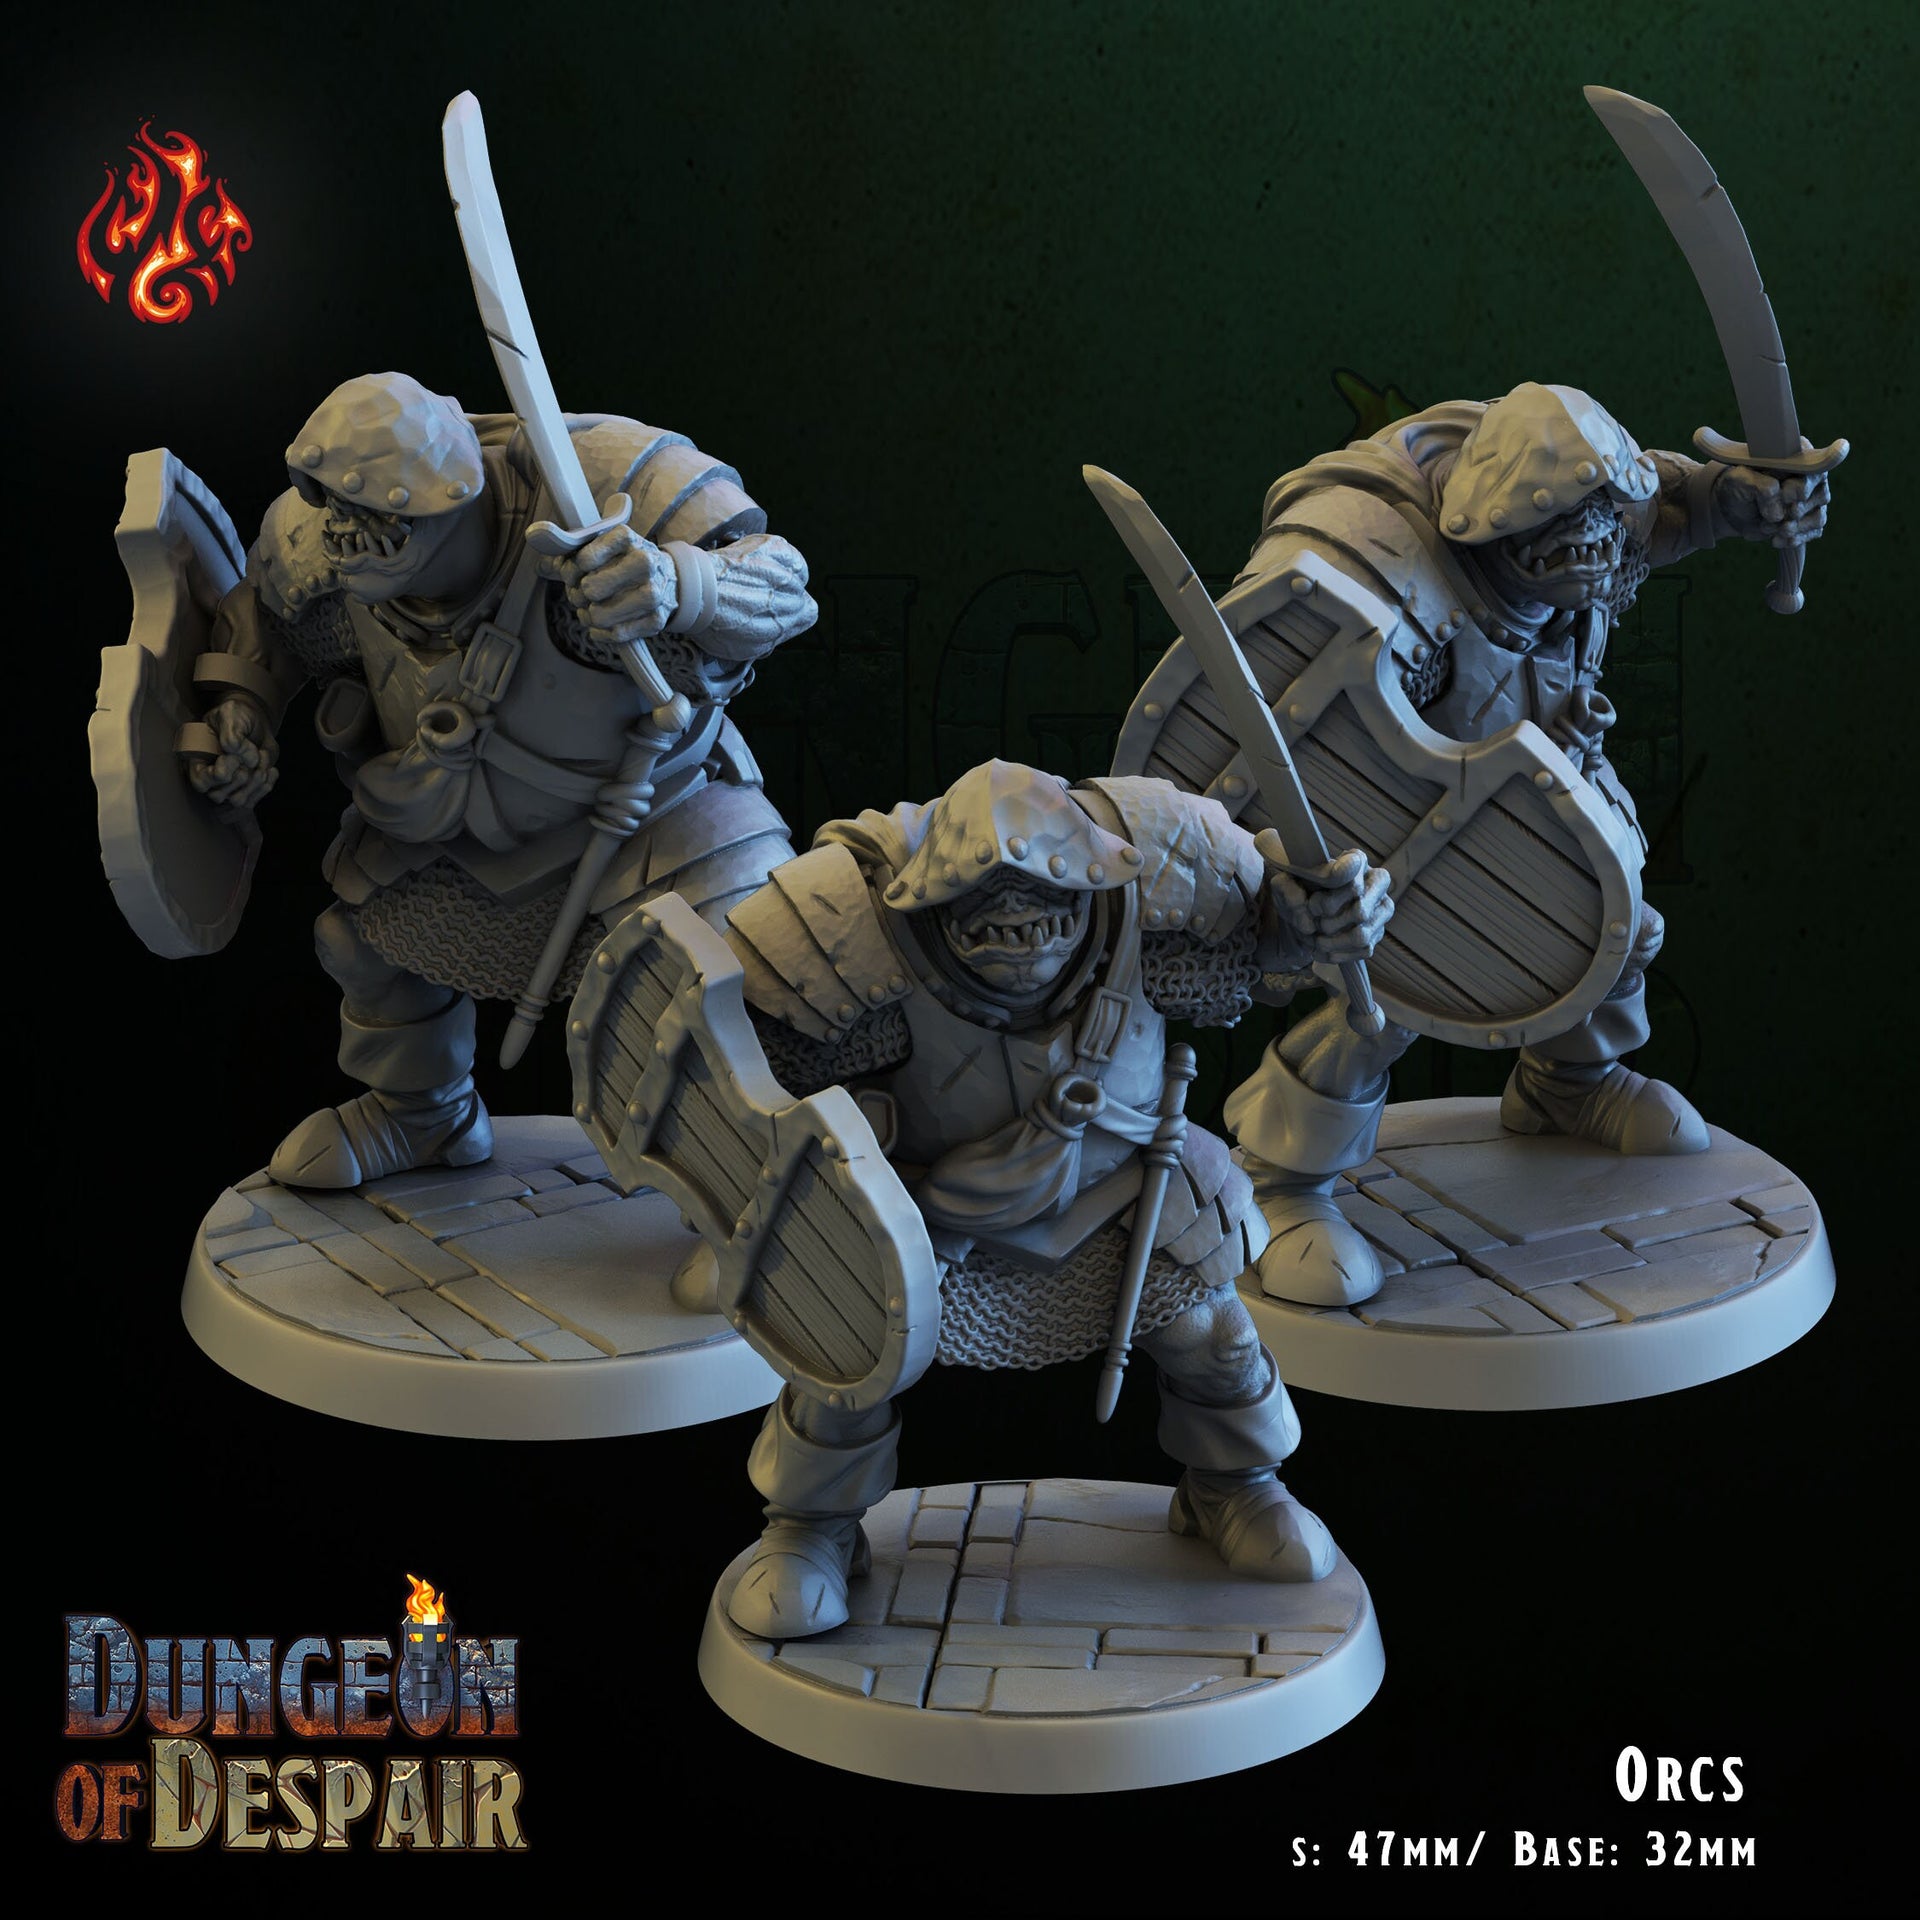 Orcs - Crippled God Foundry, Dungeon of Despair | 32mm | Evil Dwelver | Soldier | Guard | Fighter | Bandit